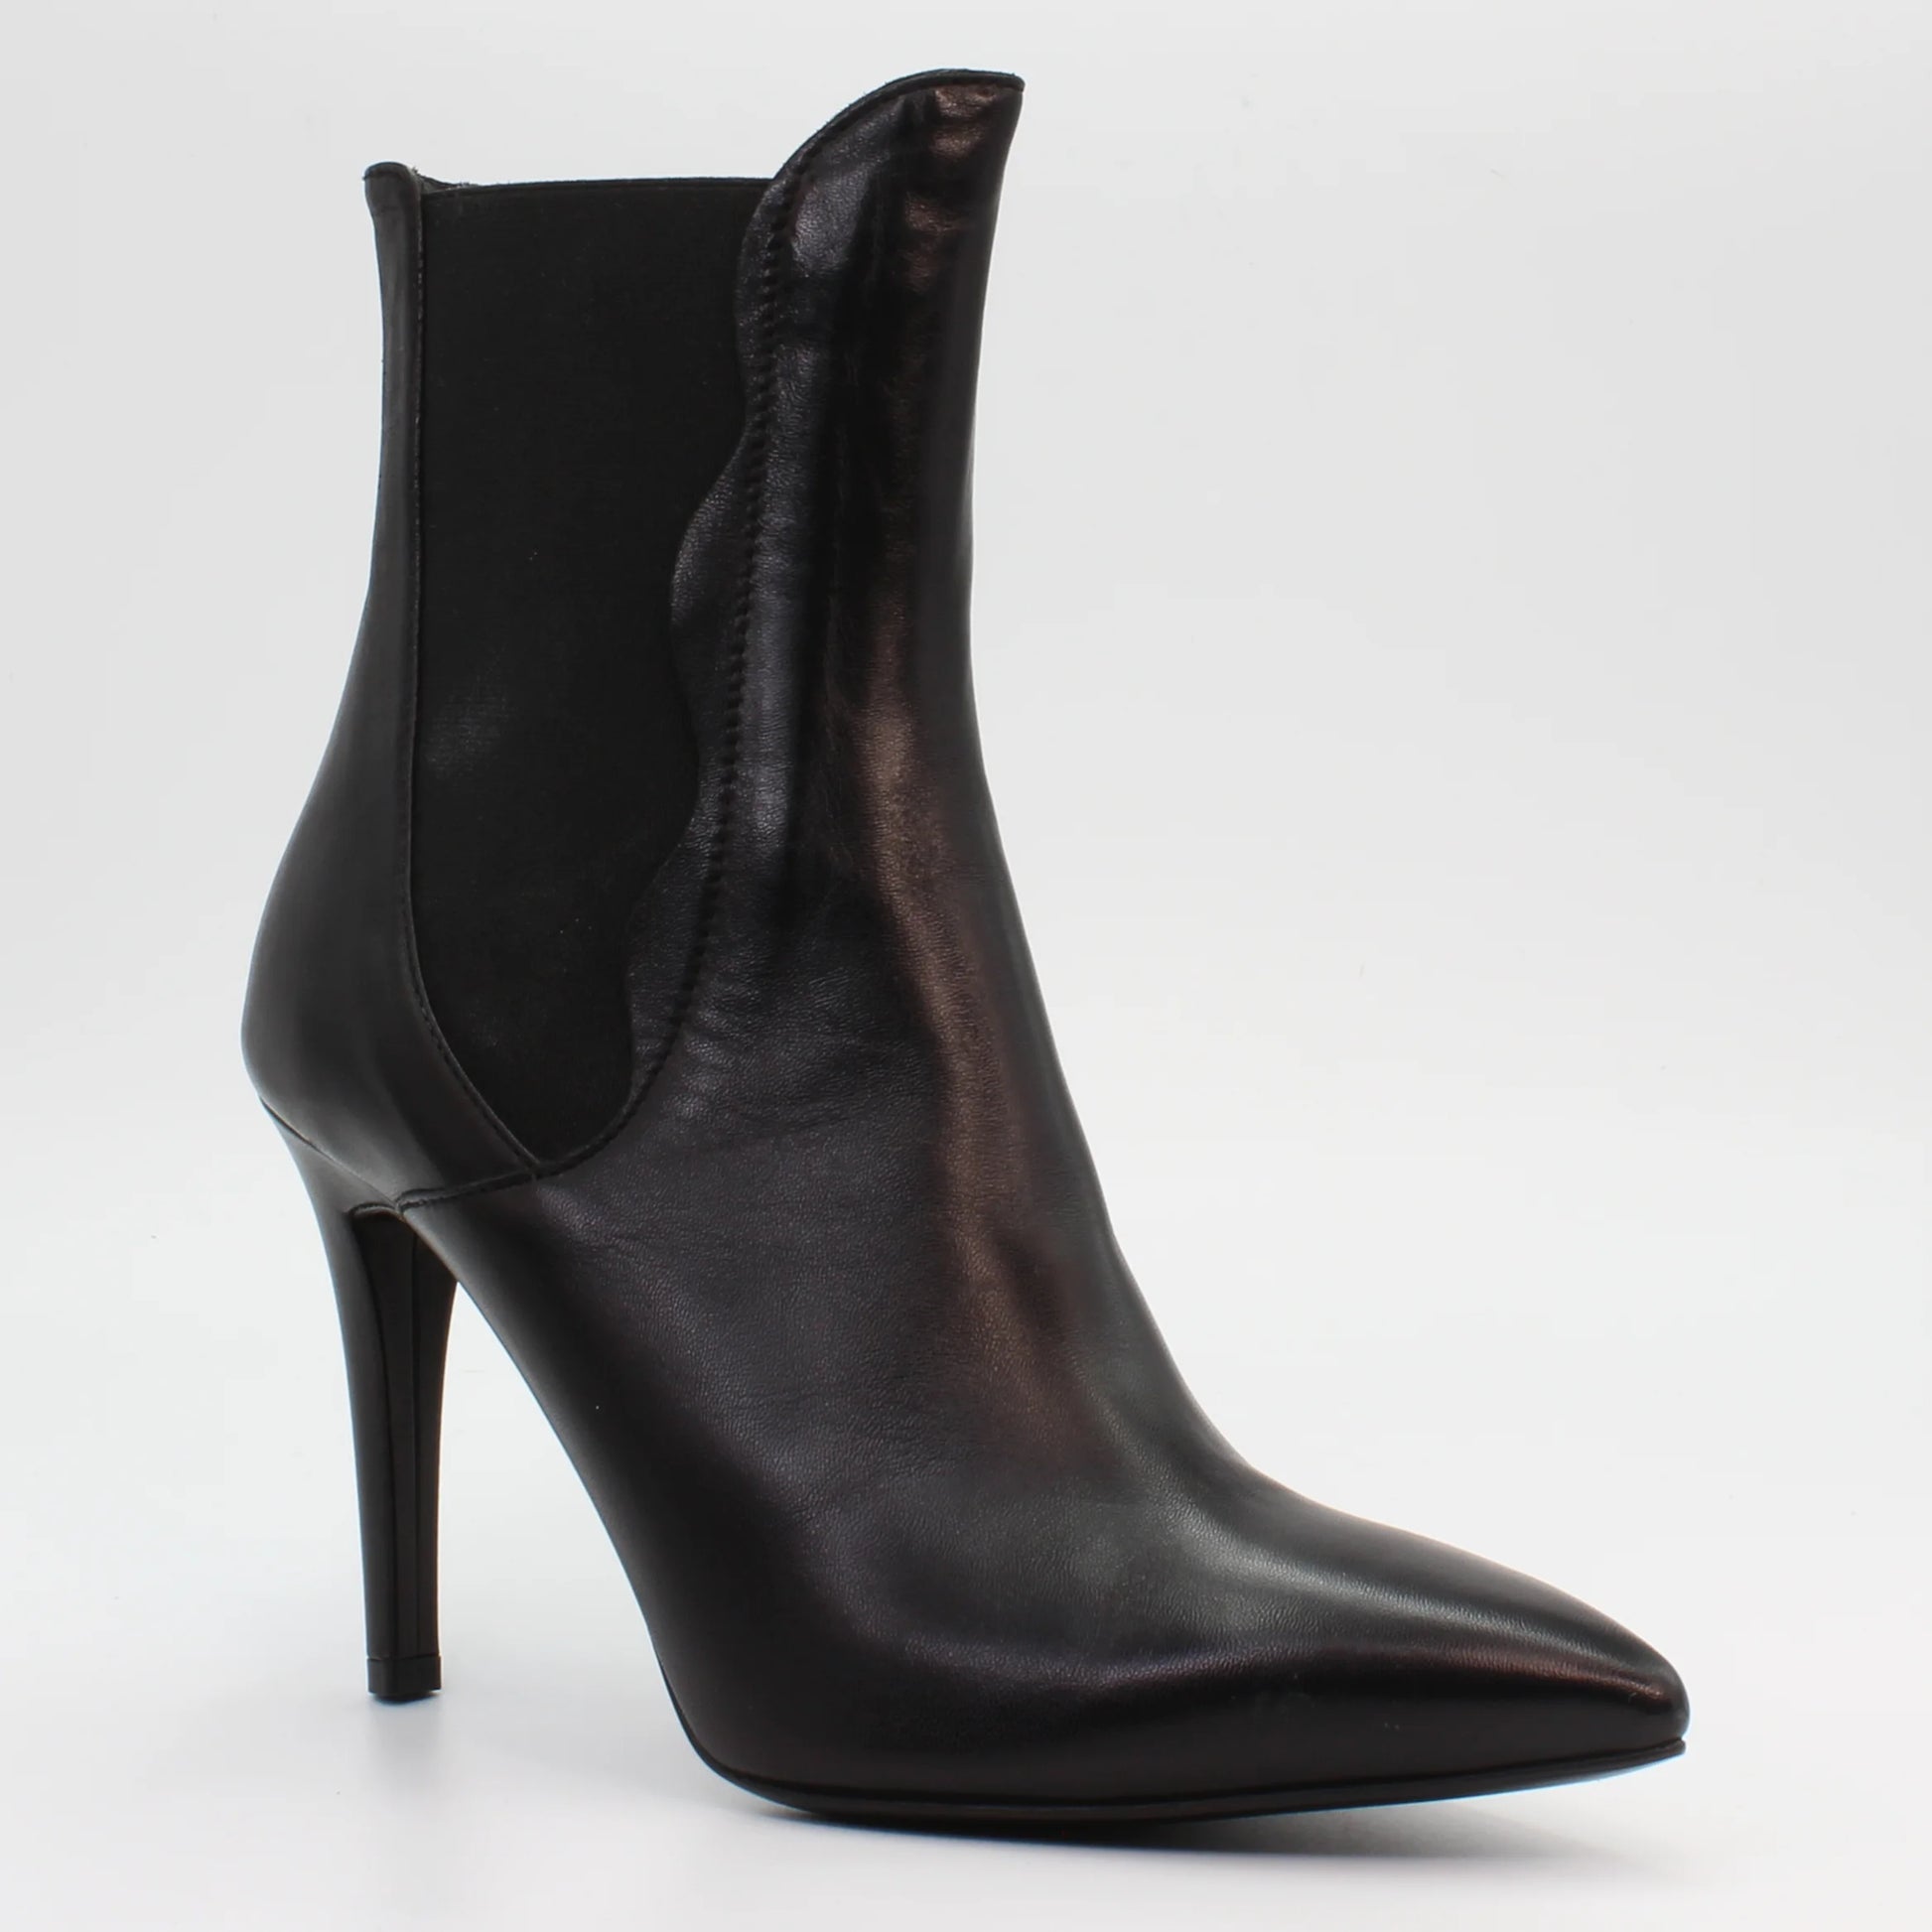 Shop Ladies Italian Stiletto Ankle Boot in Black (AL57525) or browse our range of hand-made Italian ankle boots in leather or suede in-store at Aliverti Durban or Cape Town, or shop online. We deliver in South Africa & offer multiple payment plans as well as accept multiple safe & secure payment methods.